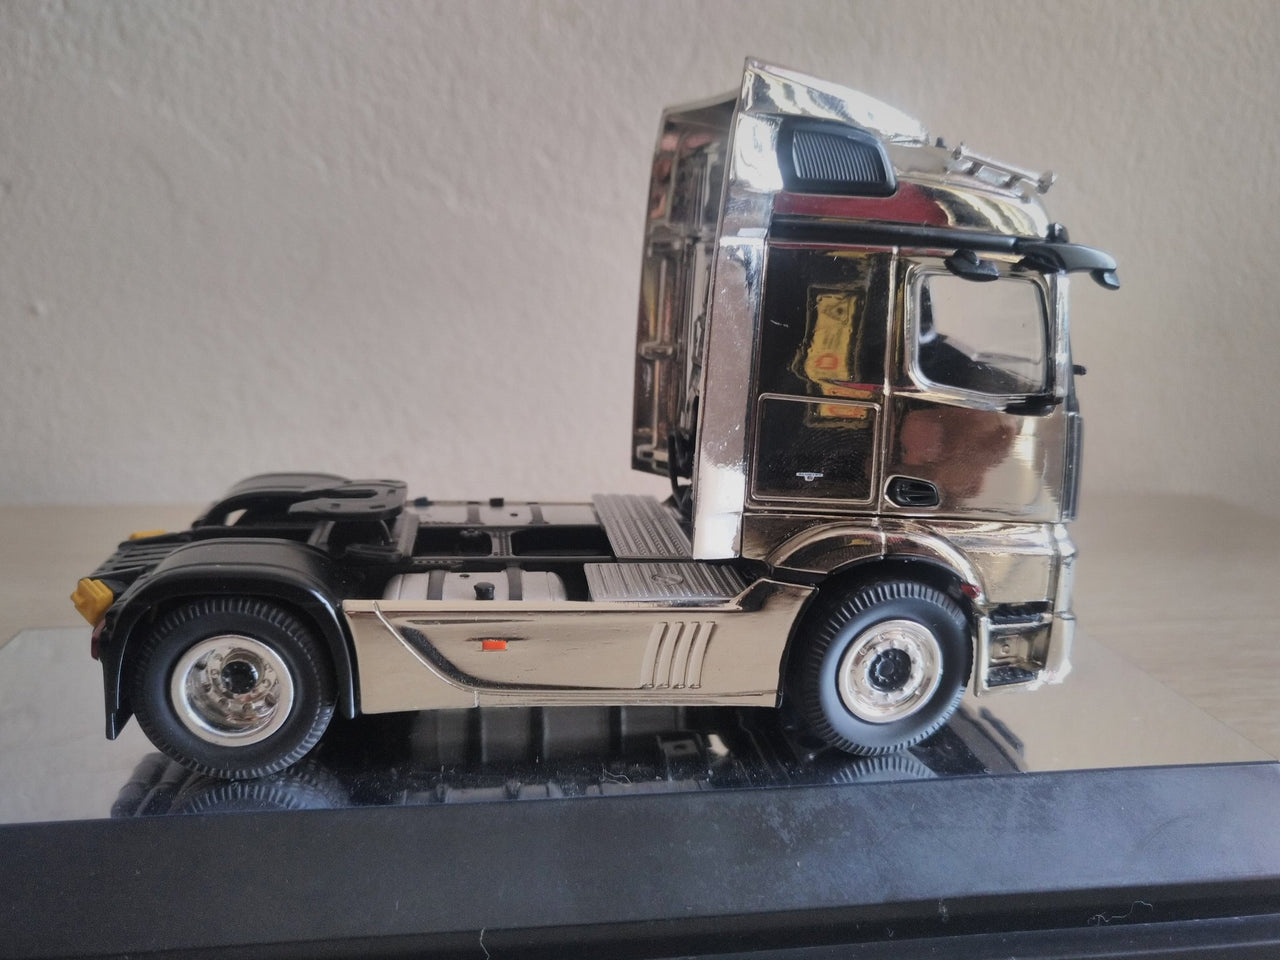 846-01 Tracto Mercedes-Benz FH23 StreamSpace 4x2 Scale 1:50 (Discontinued Model)